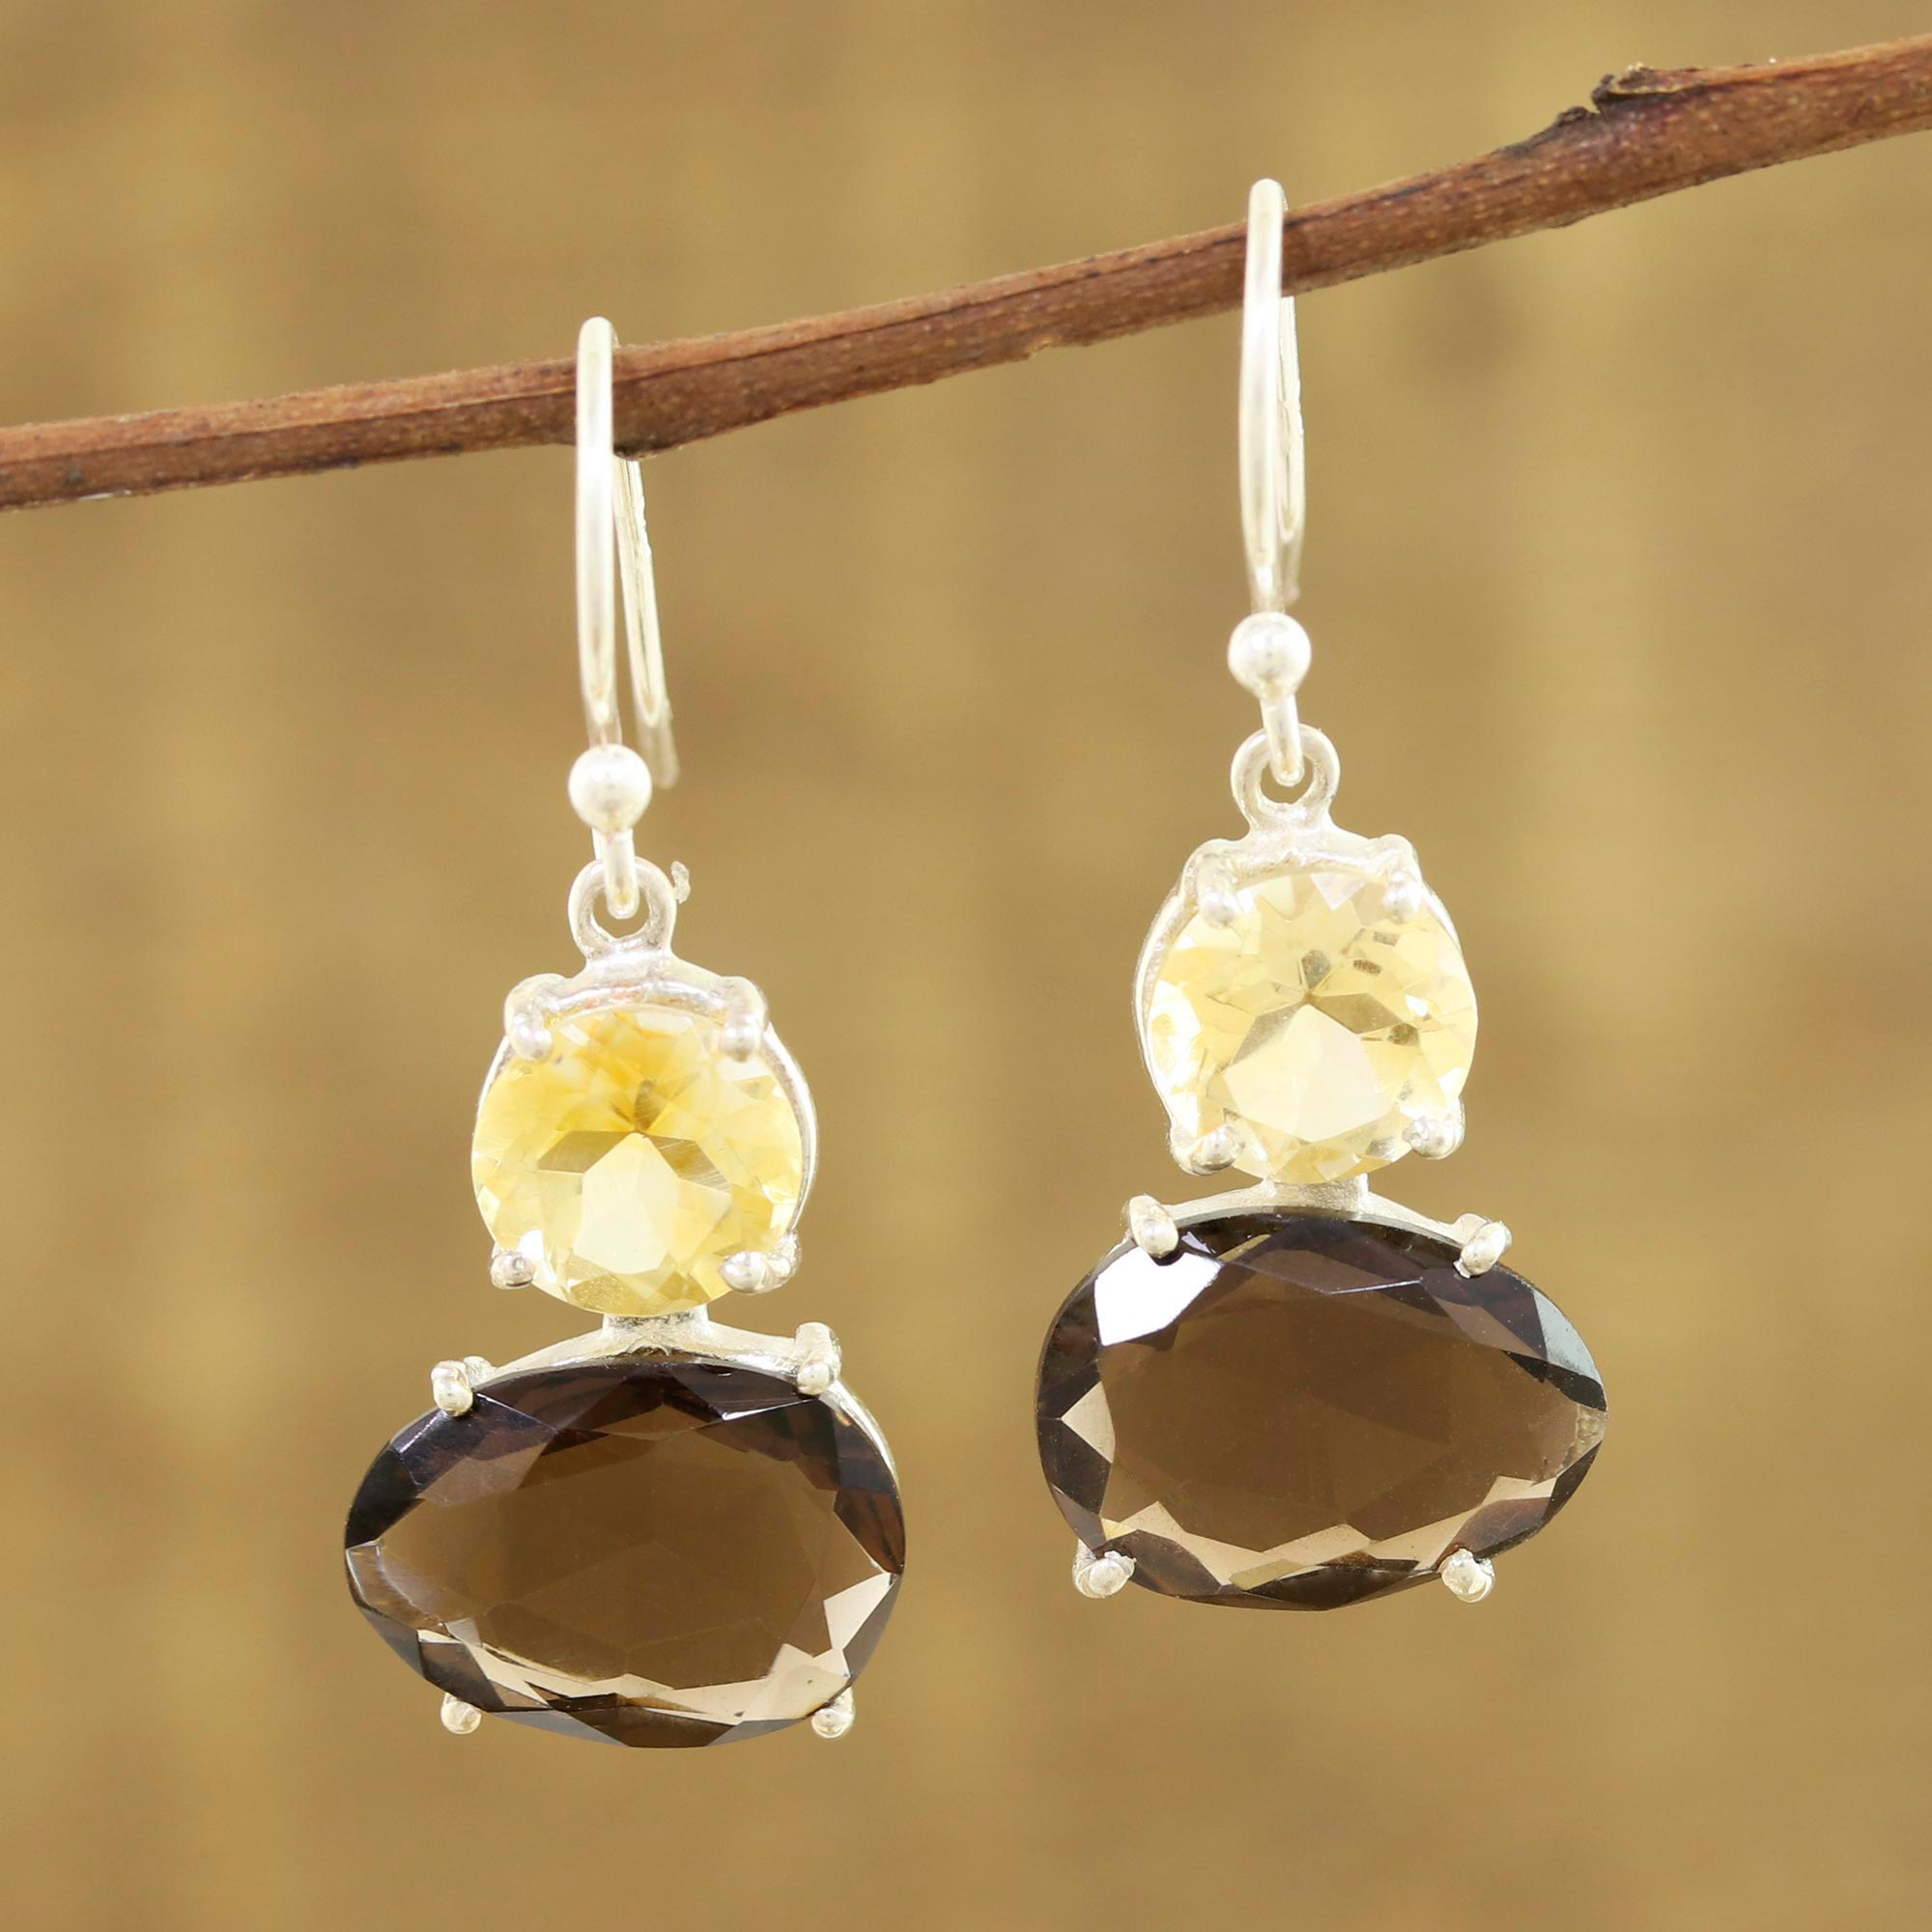 SPARKLER JEWELS Smoky Quartz,Round 925 Sterling Silver Dangle Earrings,Fashionable Gifts 